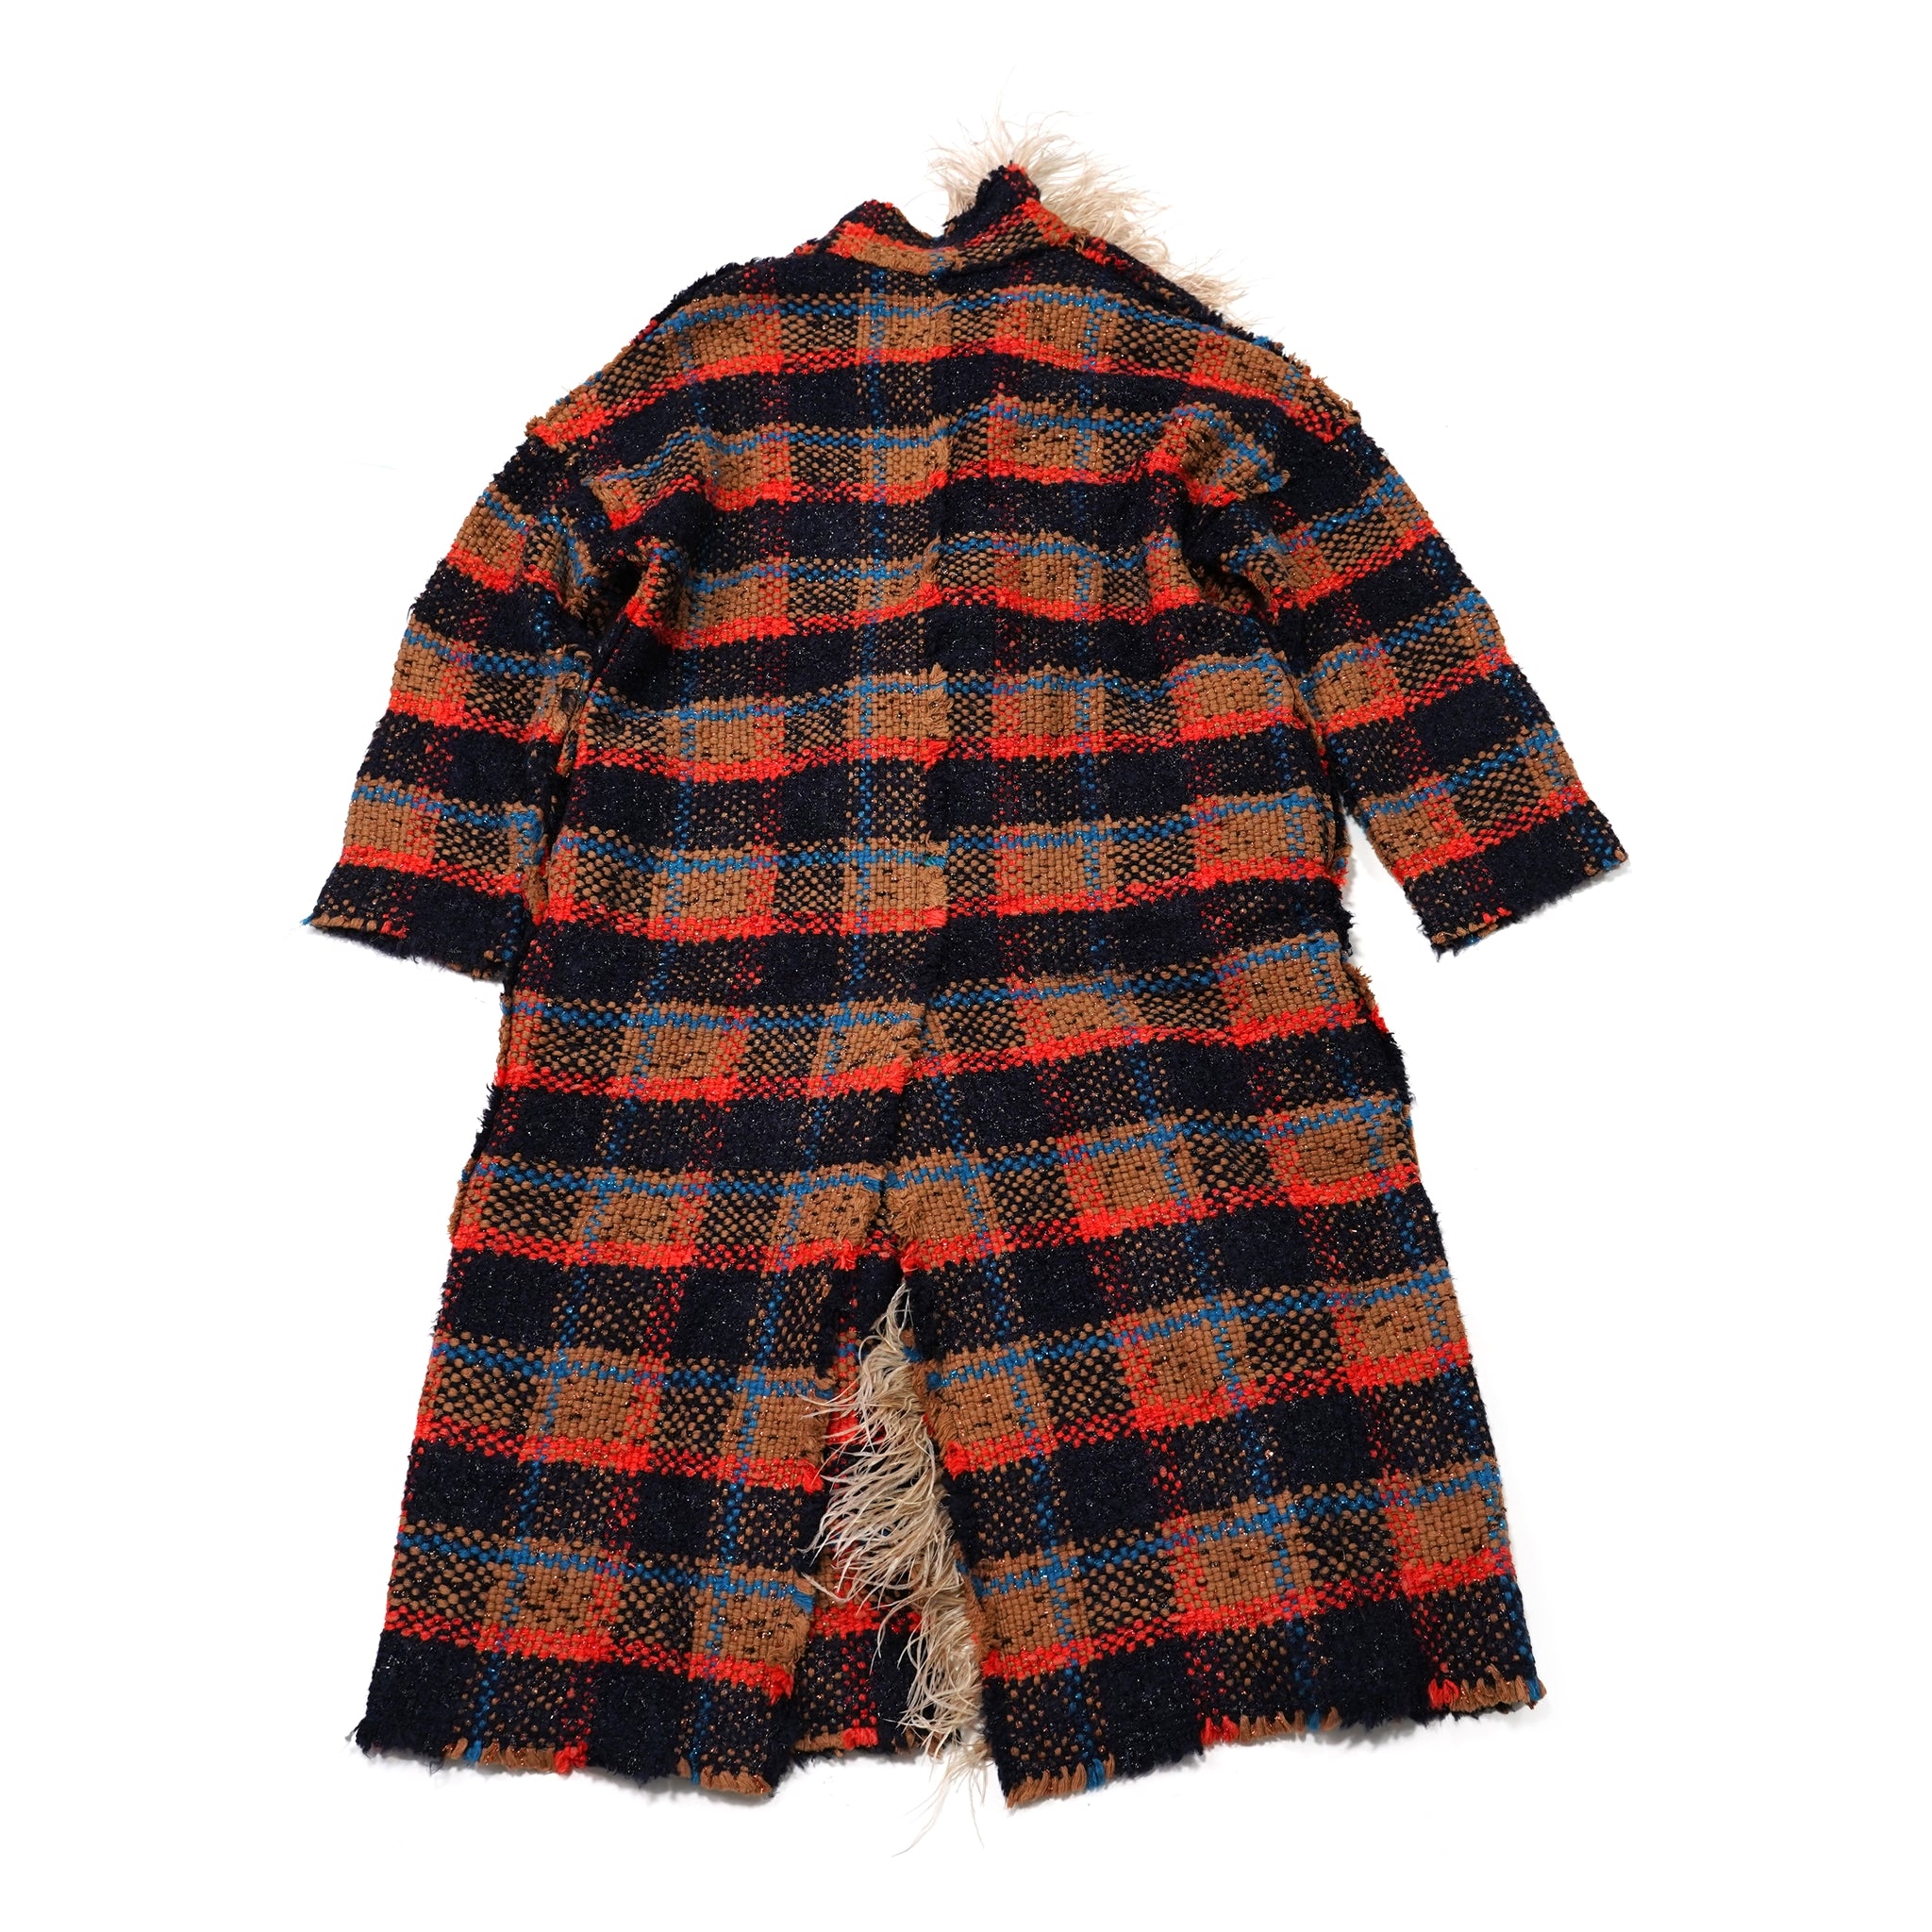 No:F12CO04 | Name:Coat | Color:Red Check | Size:S【LALO CARDIGANS_ラロカーディガンズ】